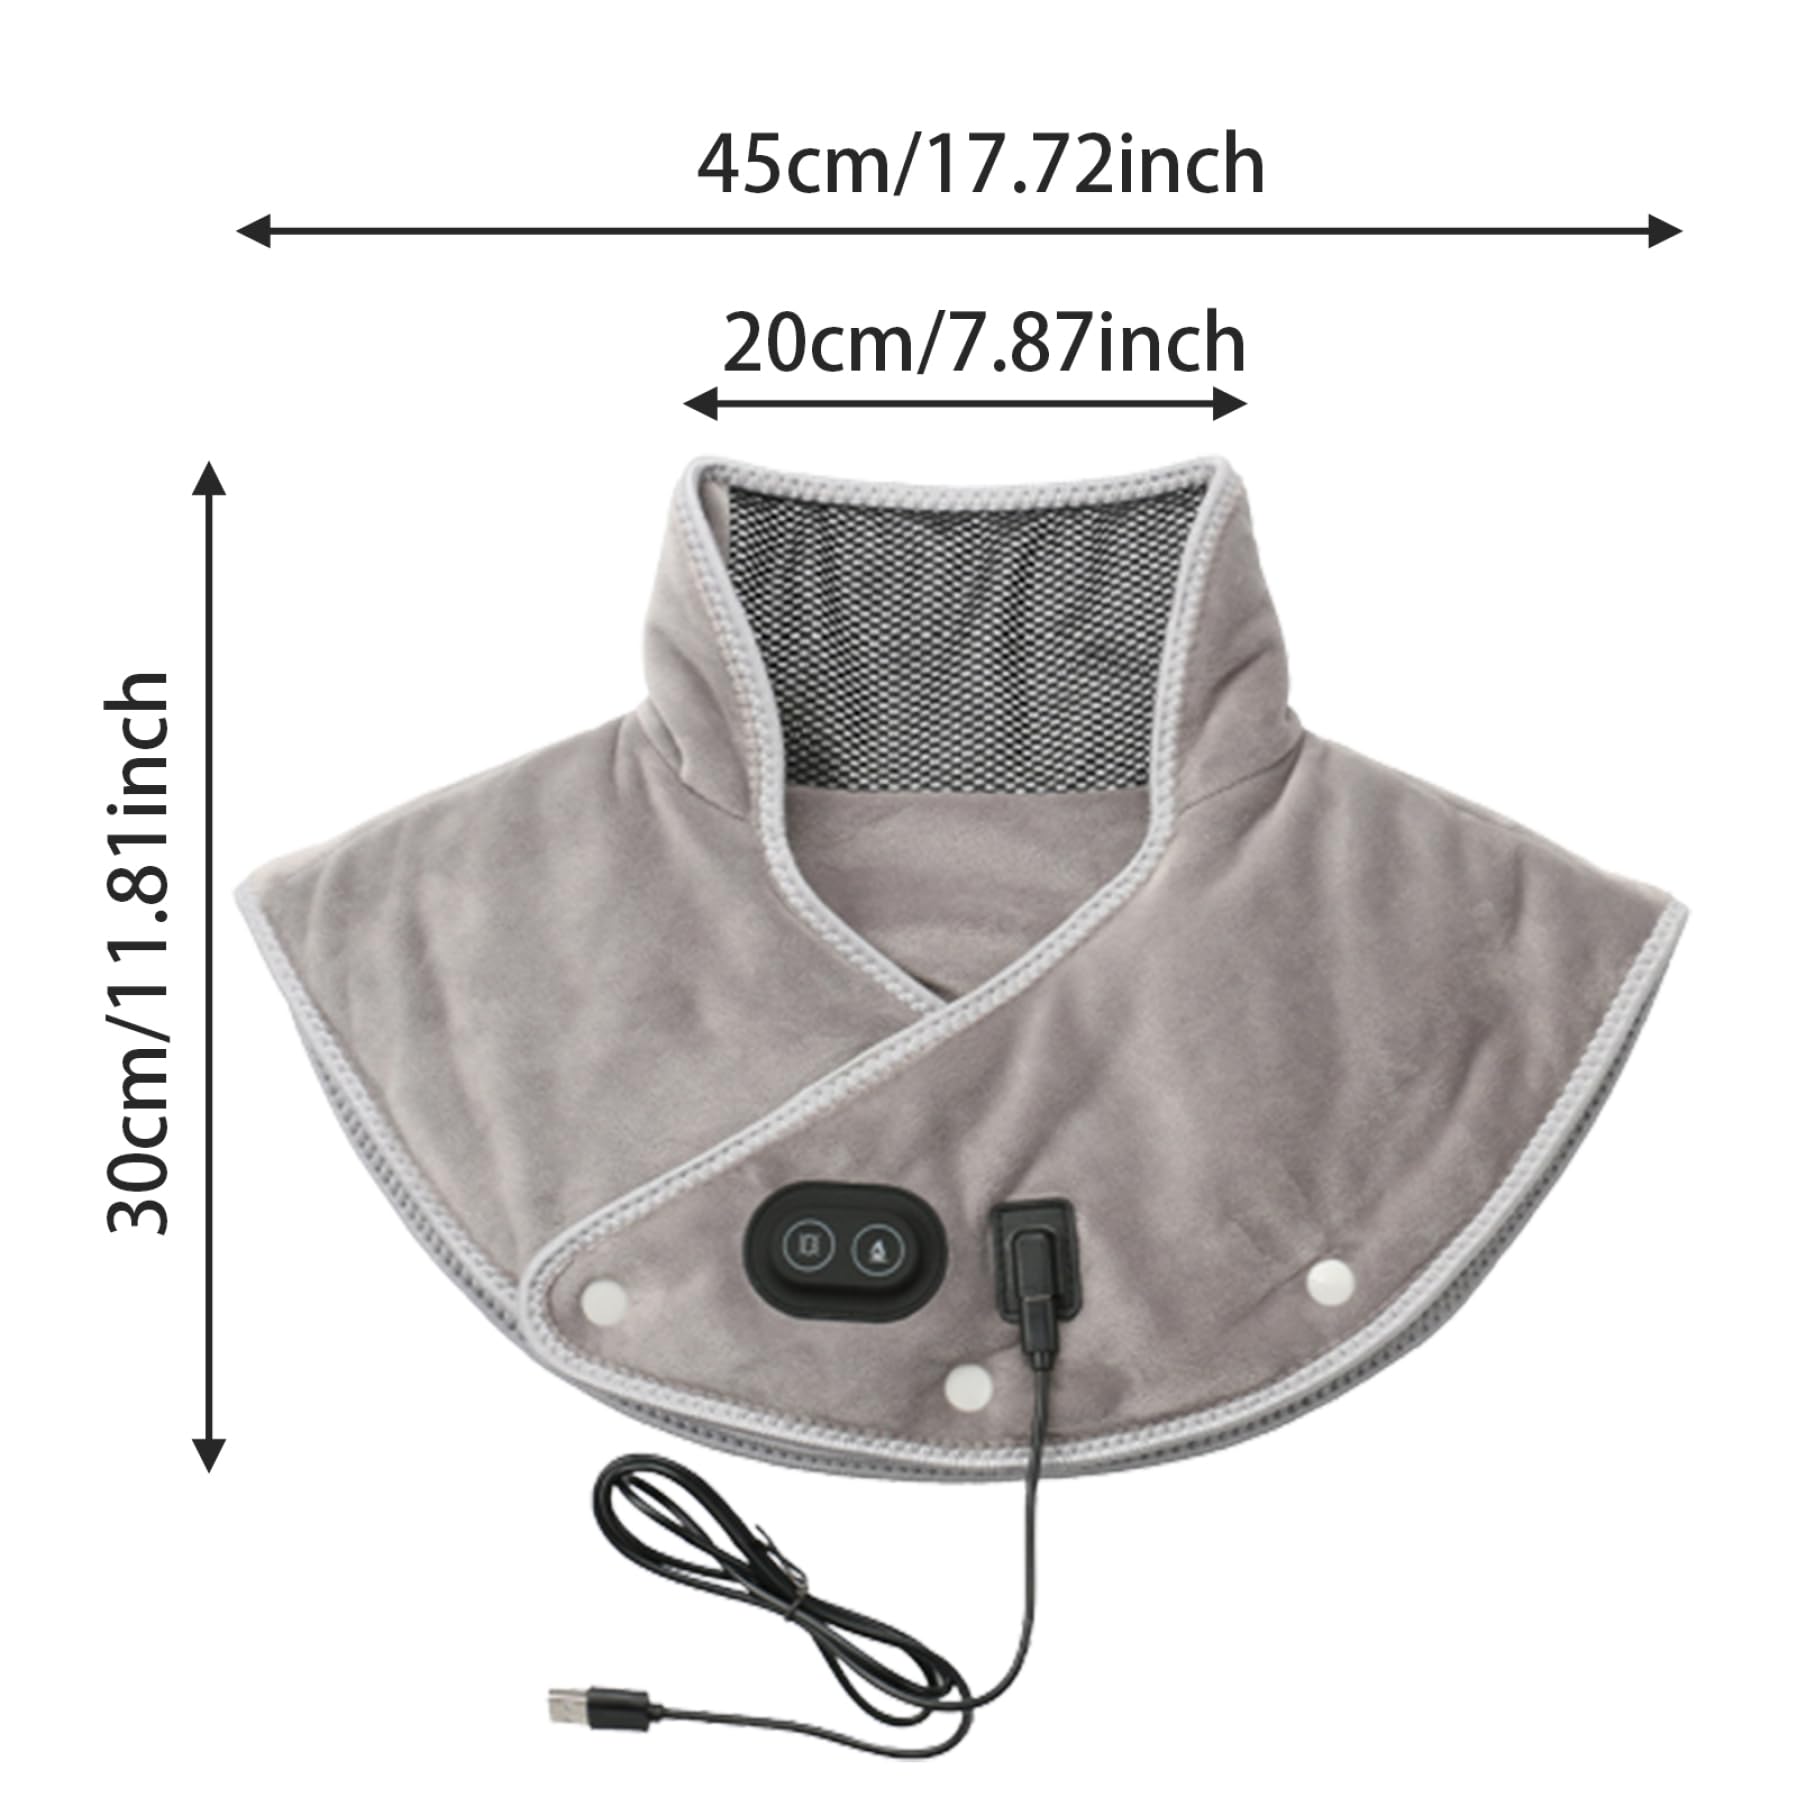 Neck and Shoulder Massager Neck Massager Neck Heating Pad with Vibration 12x18 Inch Electric Heating Pad with 3 Temp ＆ Massage Settings Auto Shut-Off Vibrating Heating Pad Gifts for Pain Relief